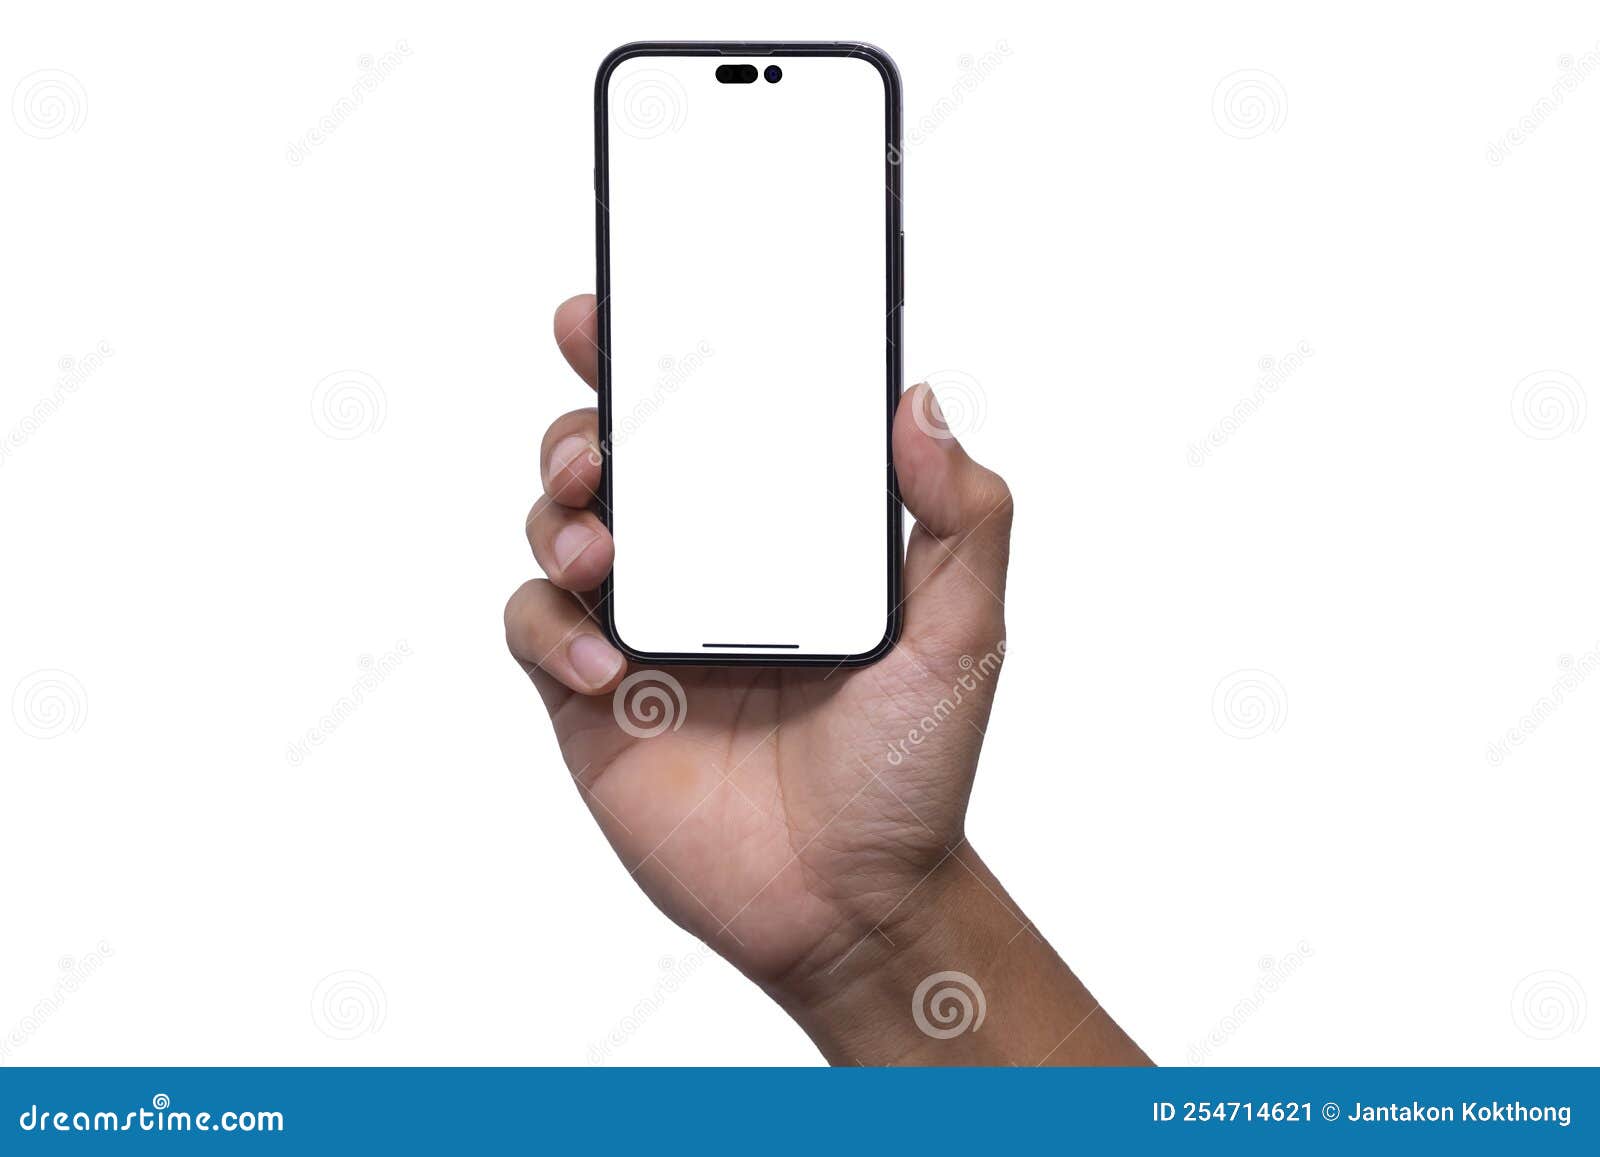 mockup iphone 14 pro max and new iphon mini. mock up screen iphone x . transparent and clipping path  for